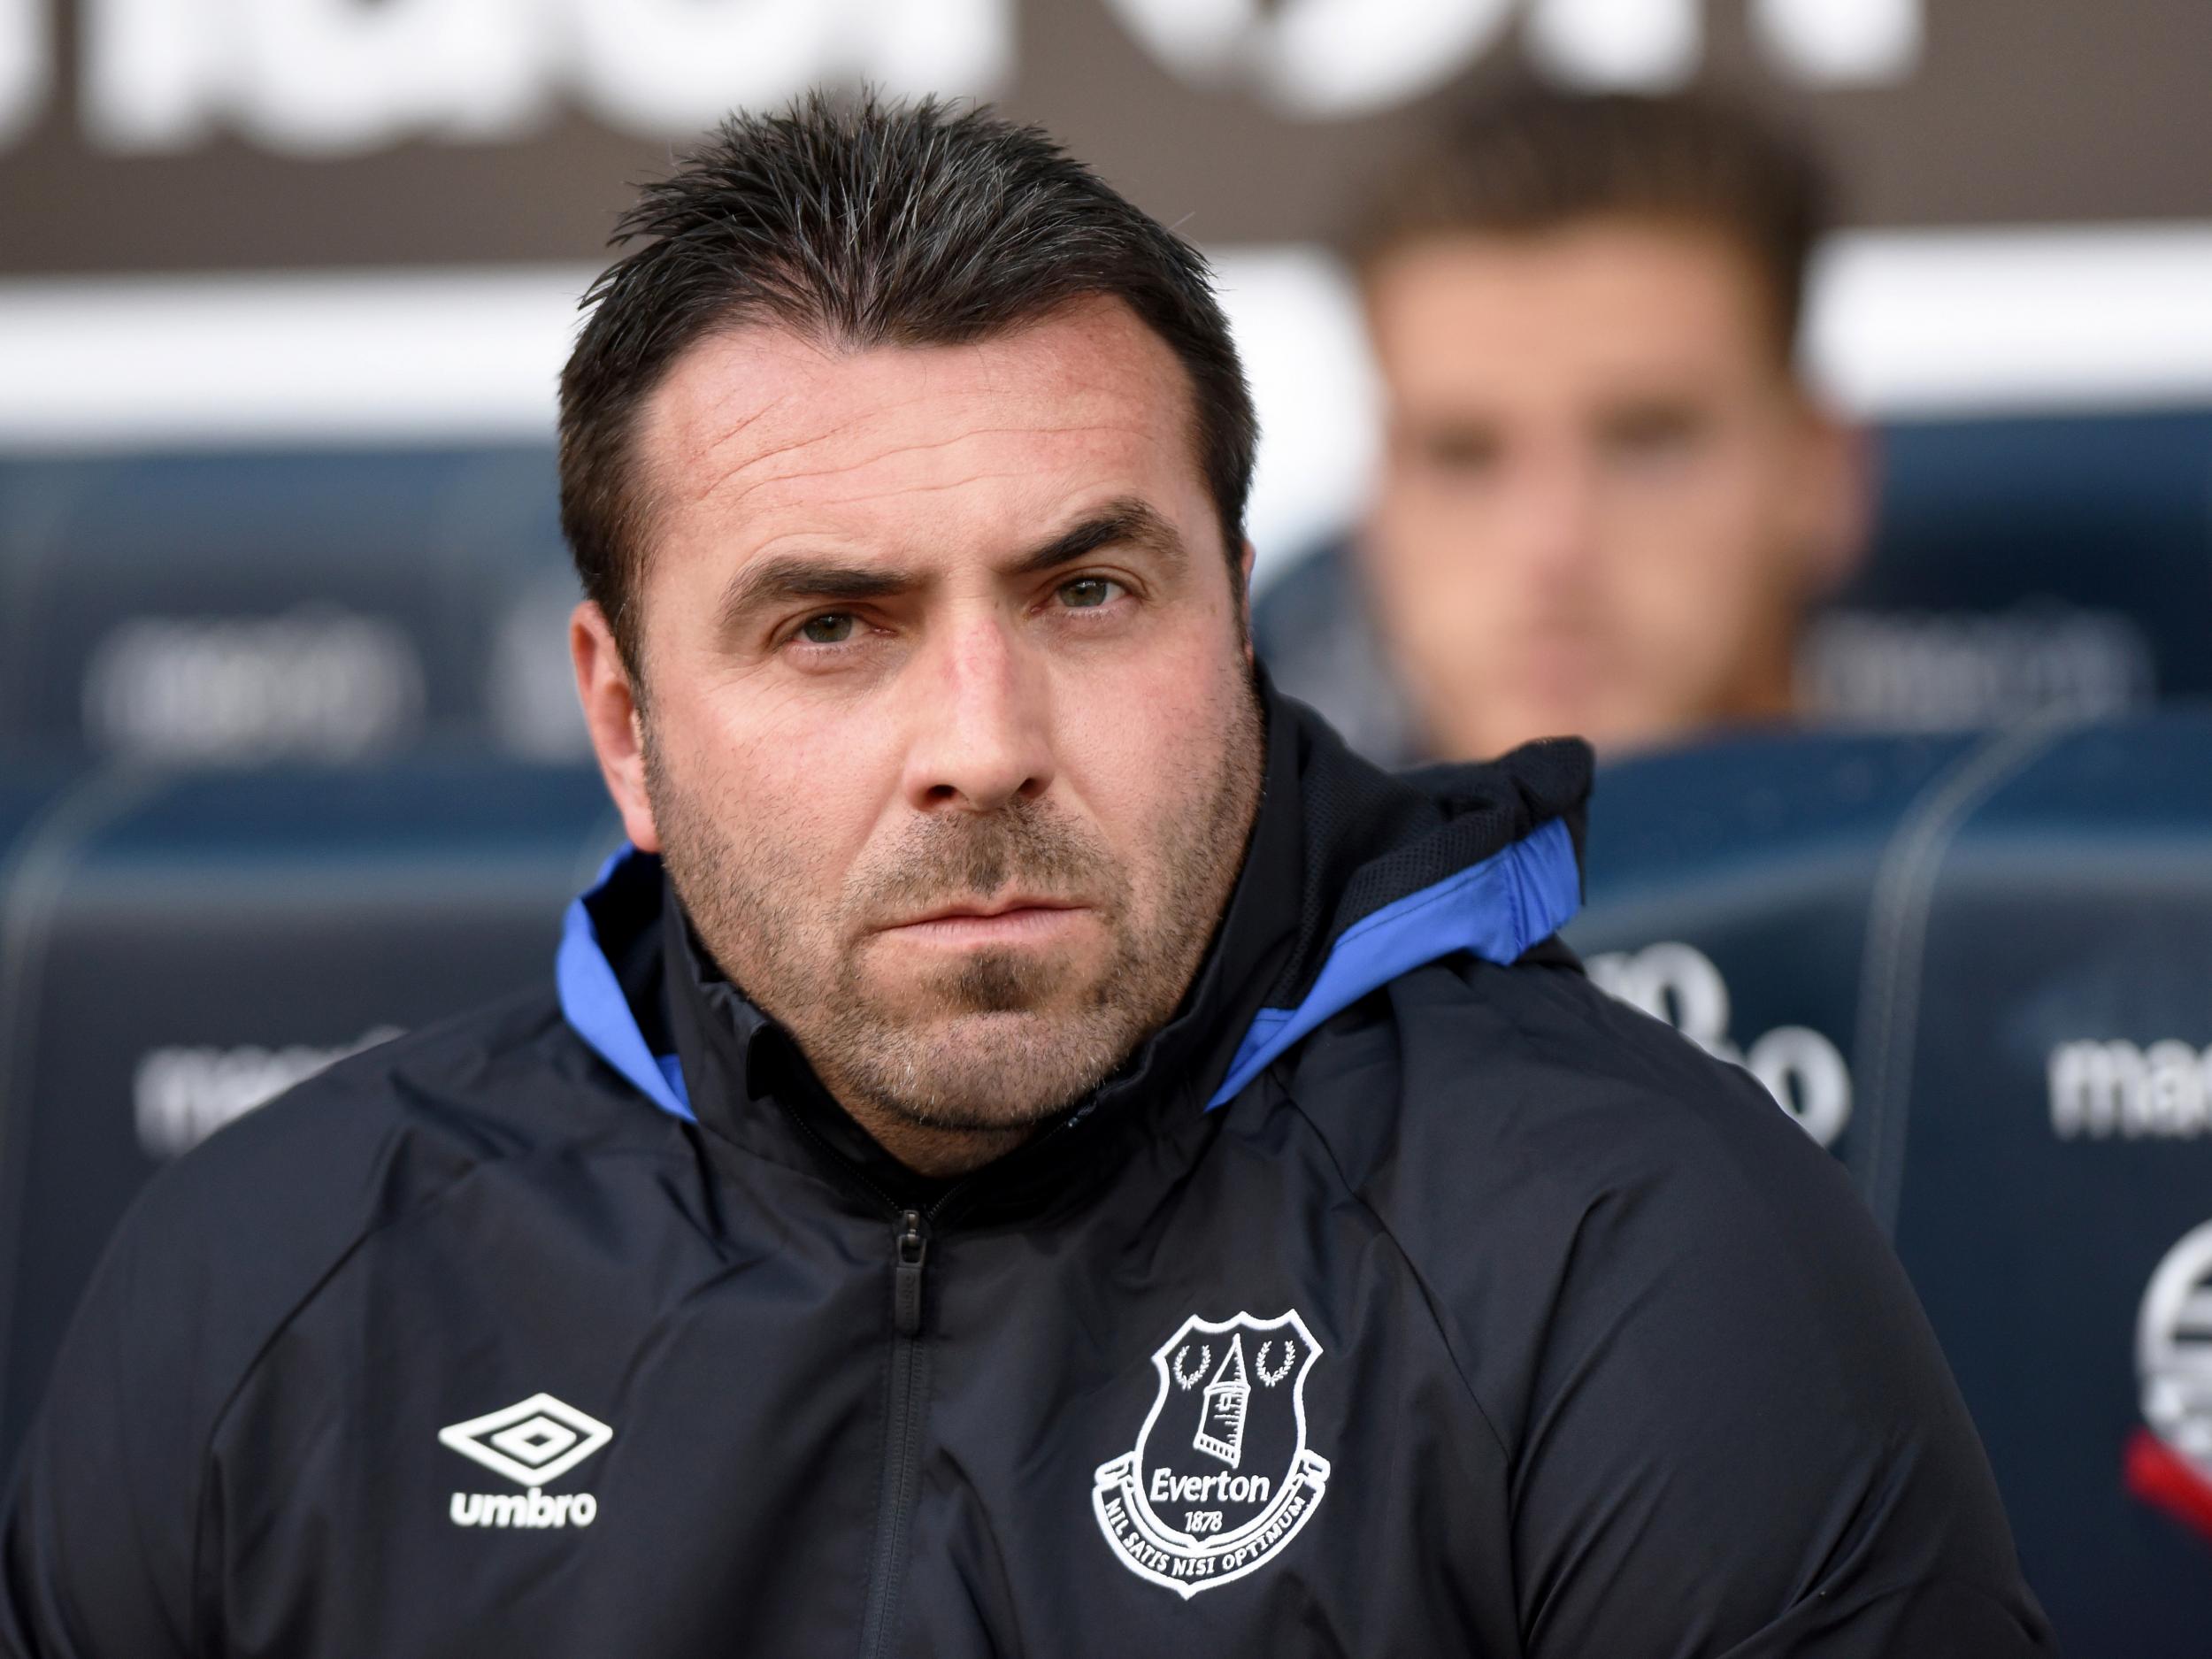 Unsworth is the internal candidate and, many players feel, the strongest one